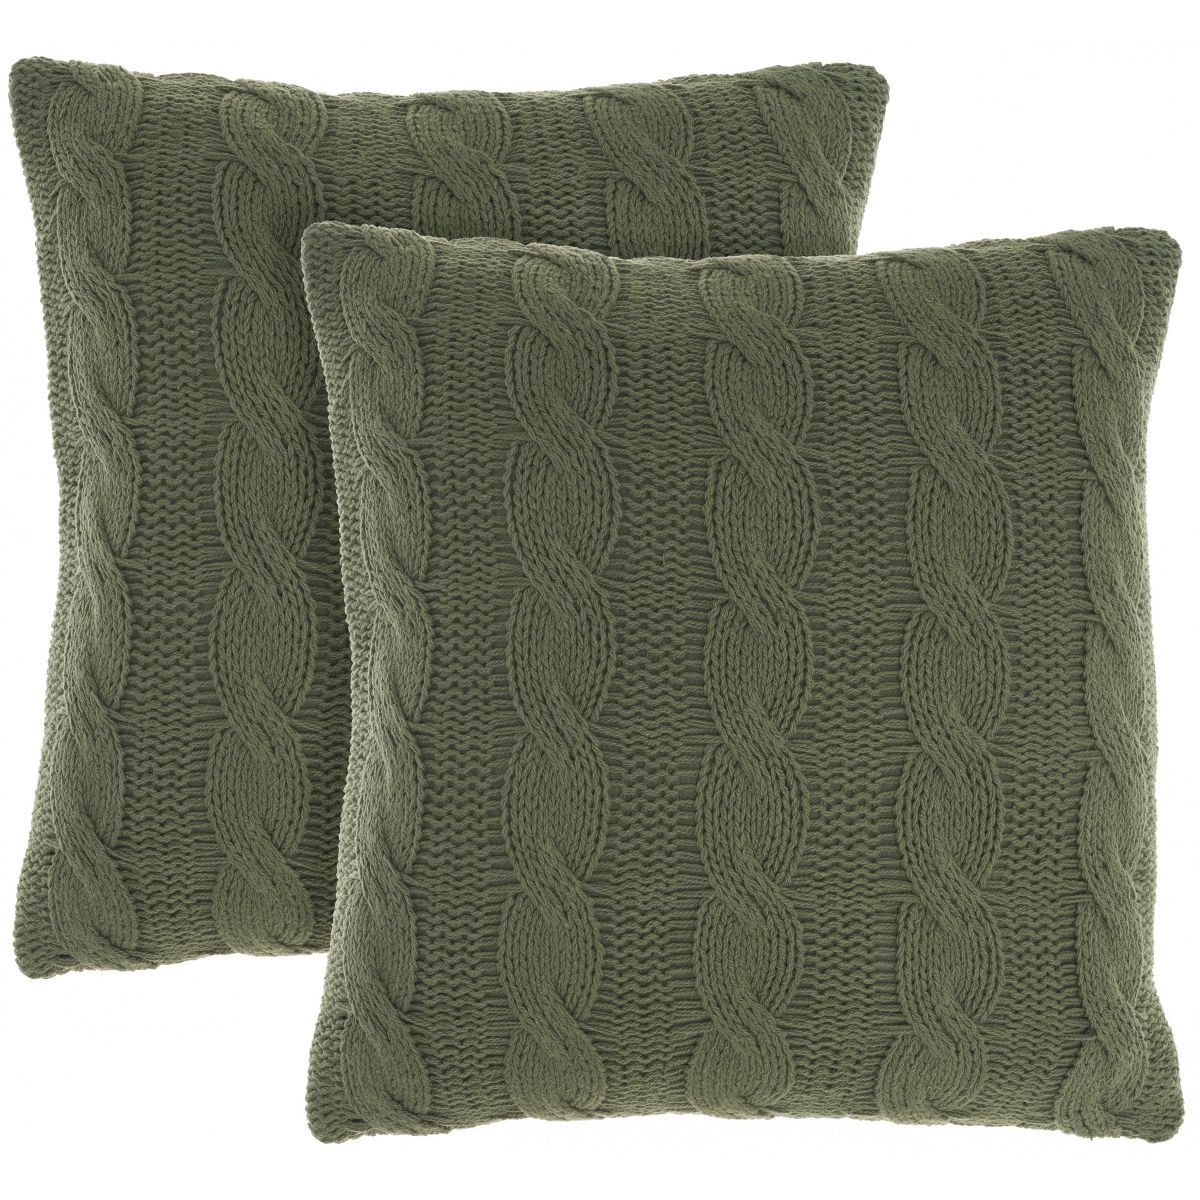 Mina Victory Life Styles Cotton Knitted 18"x18" Indoor Throw Pillows Set of 2 | Target